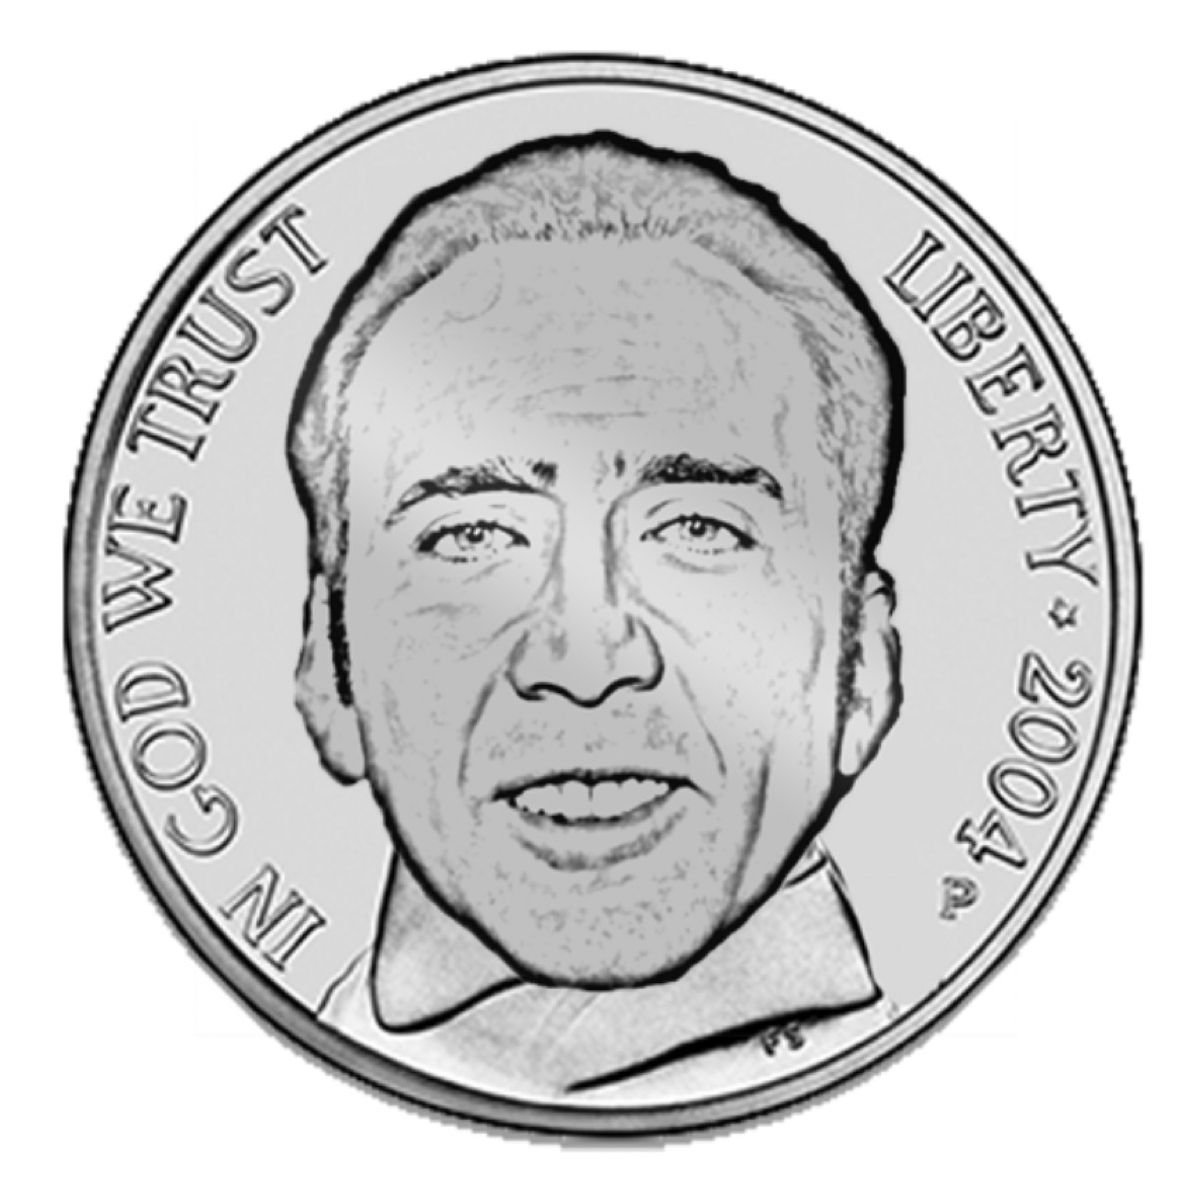 On this day 23 years ago they officially took Jefferson off the nickel and replaced him with Nic Cage, and ever since the 5 cent coin has been called a Nickelas, 1999